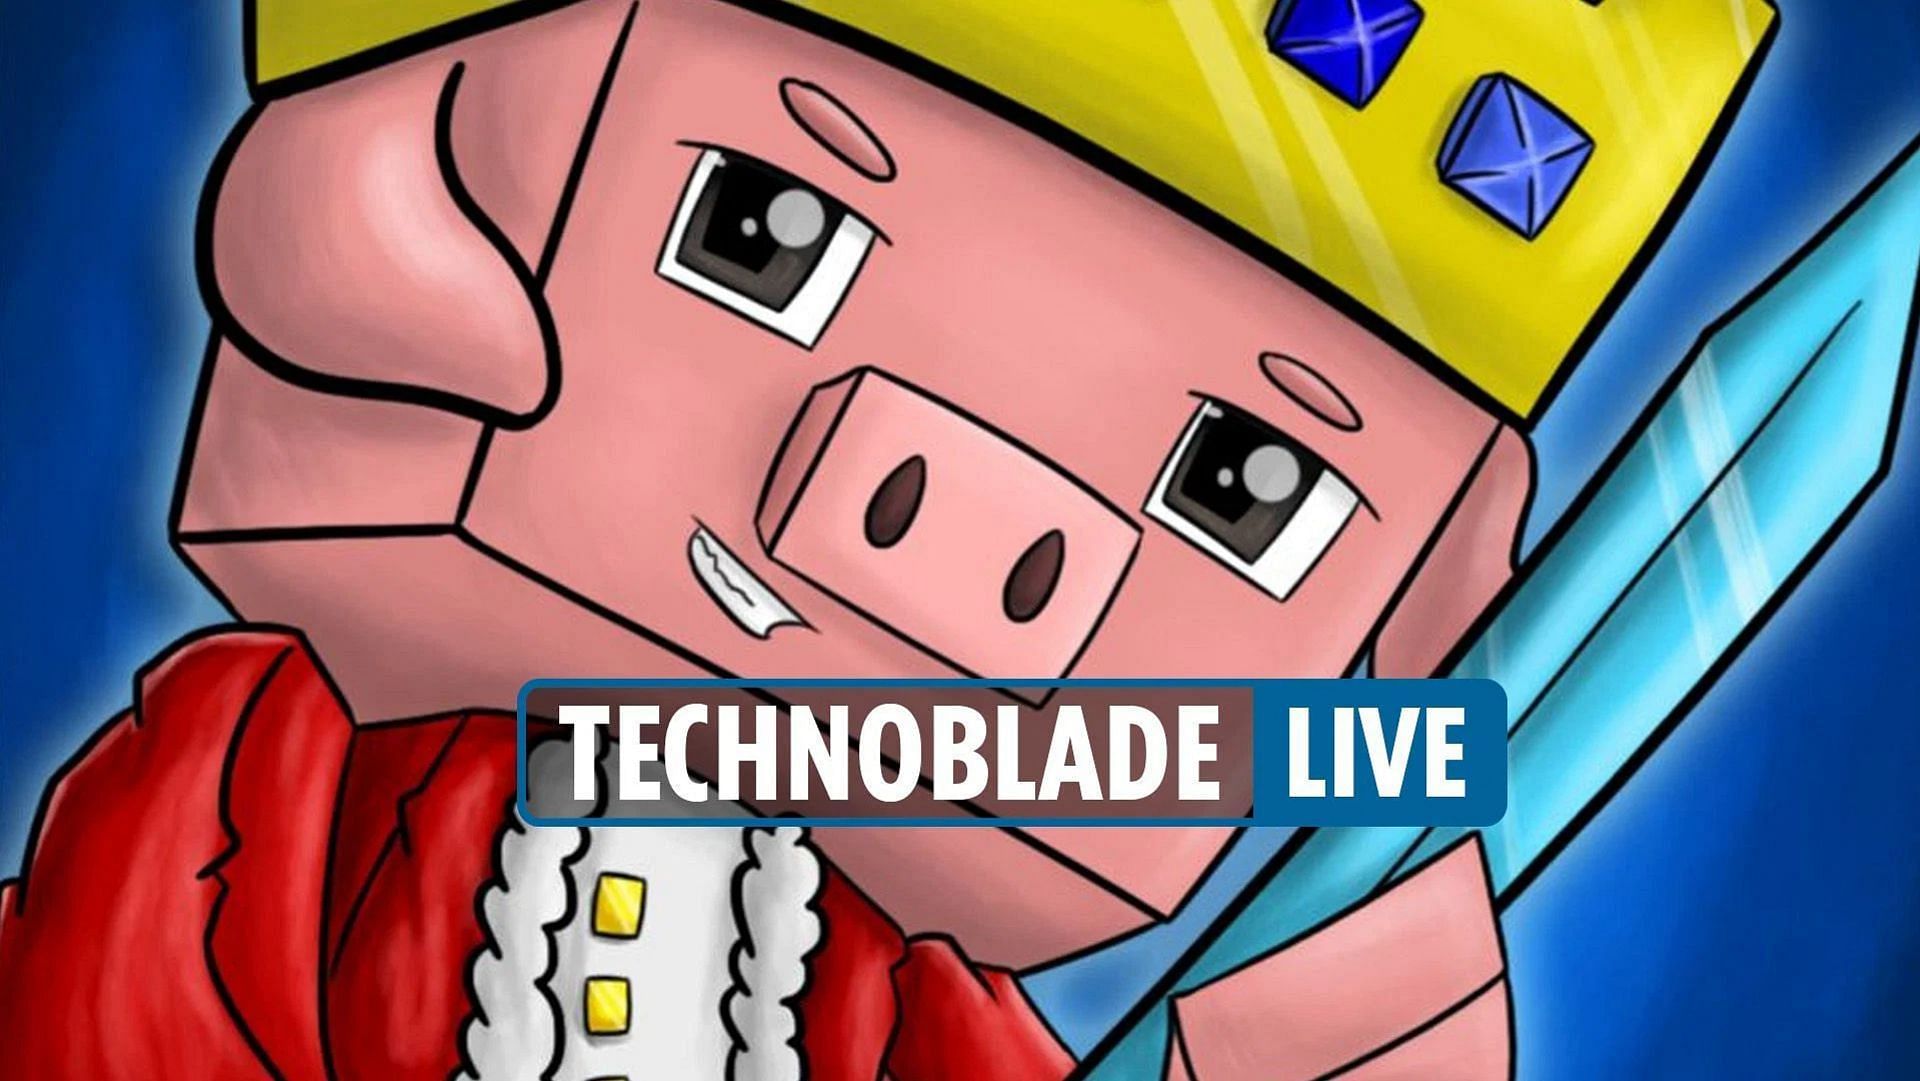 Who is Technoblade? All you need to know about the popular